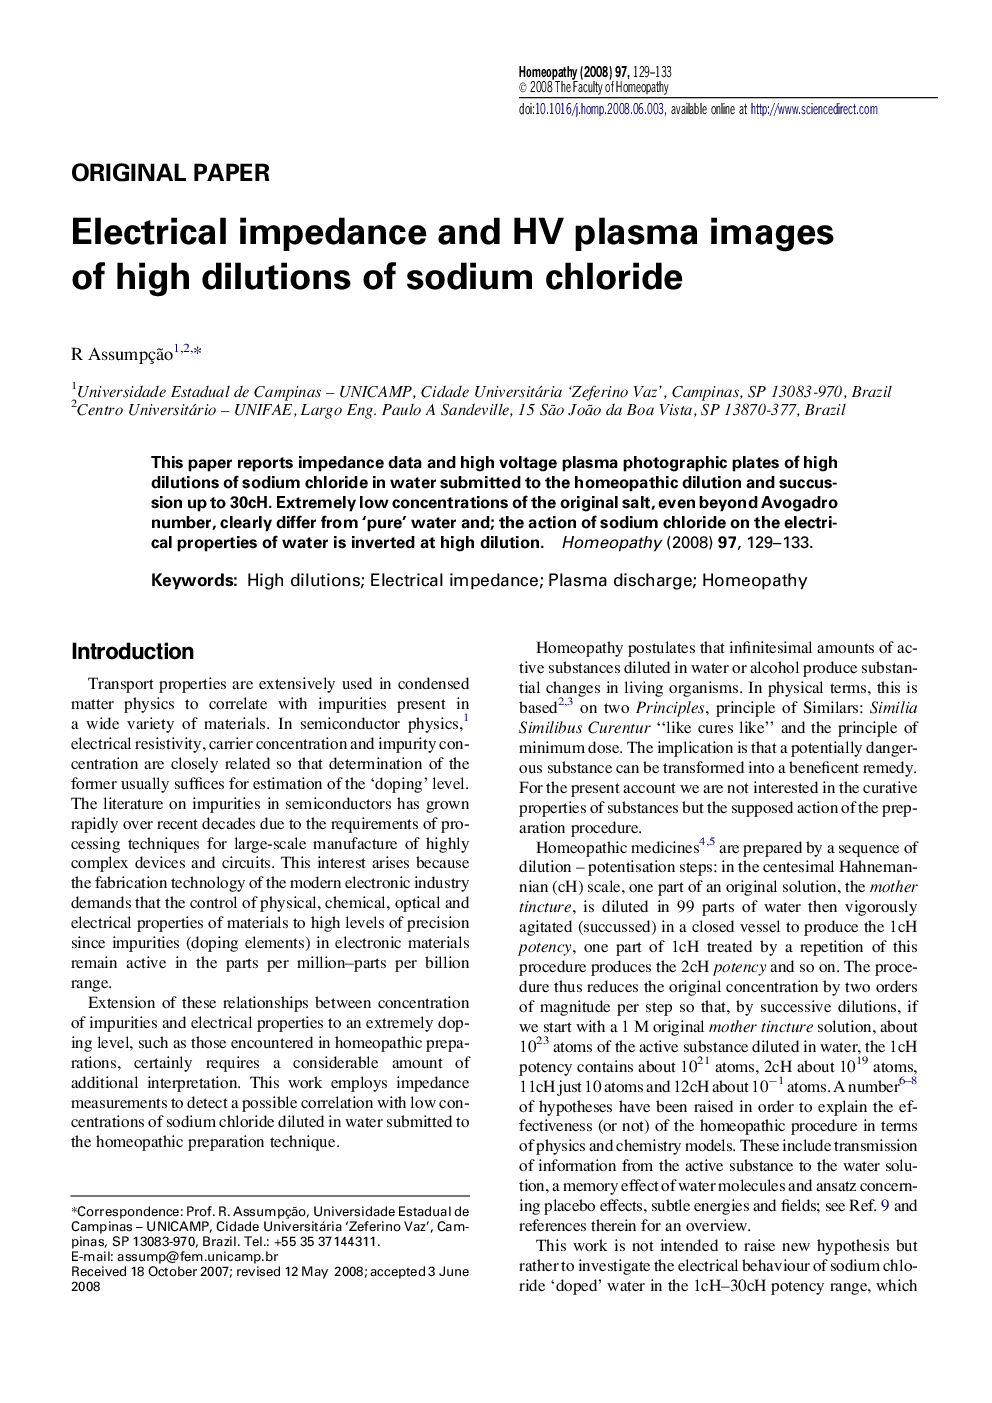 Electrical impedance and HV plasma images of high dilutions of sodium chloride